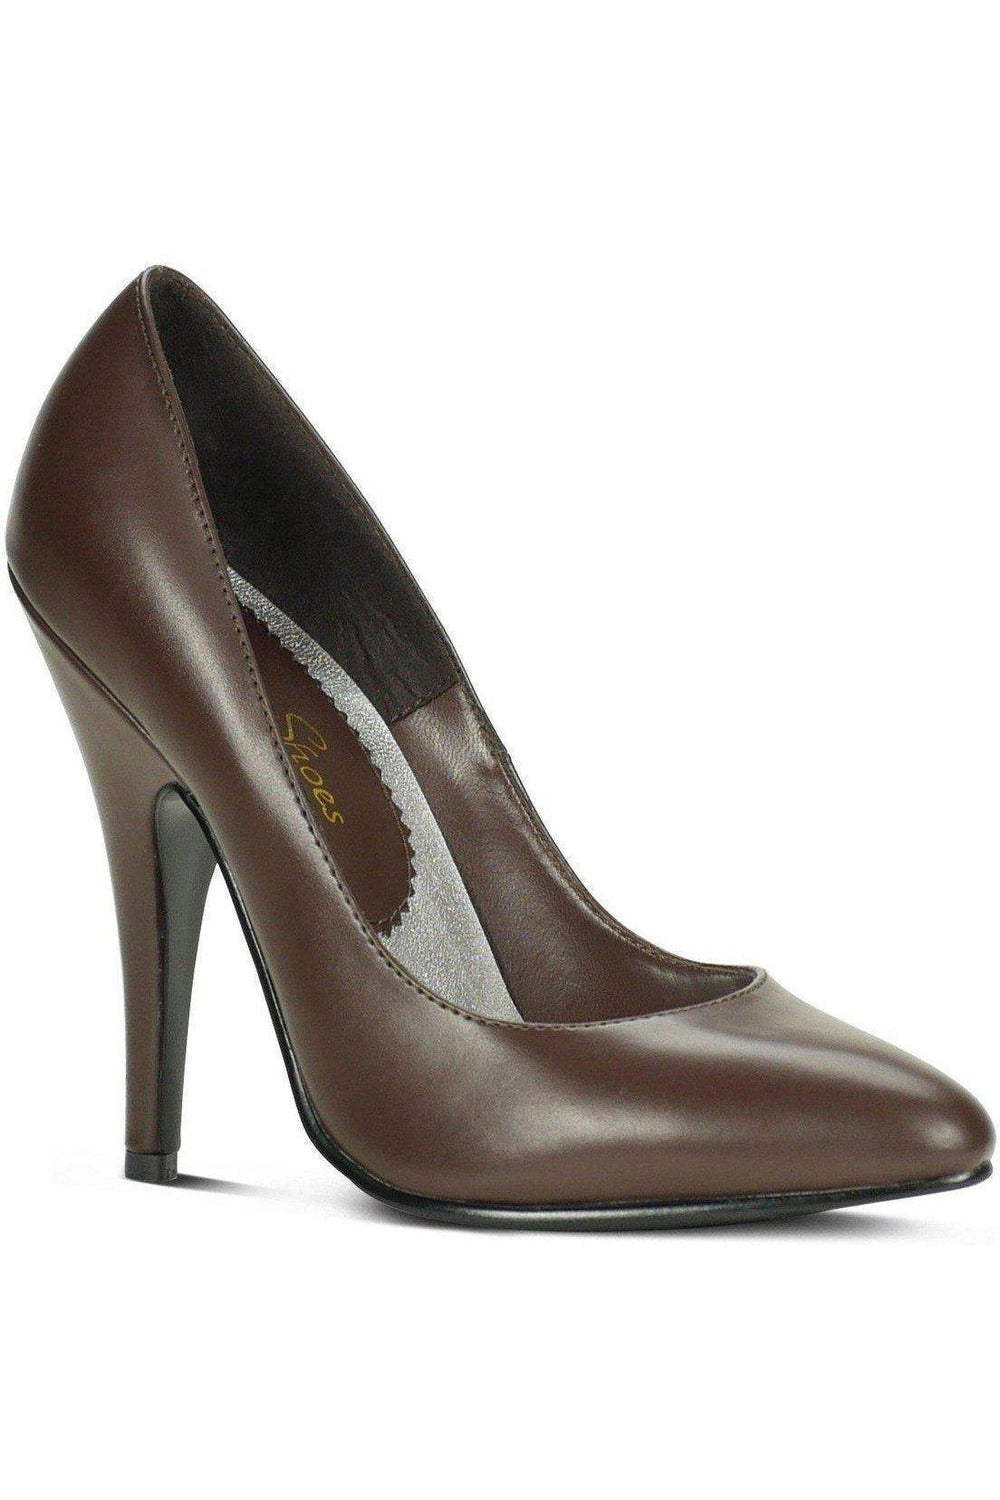 Sexy-4211 Vintage High Heel Pump | Brown Faux Leather-Sexyshoes Brand-Brown-Pumps-SEXYSHOES.COM